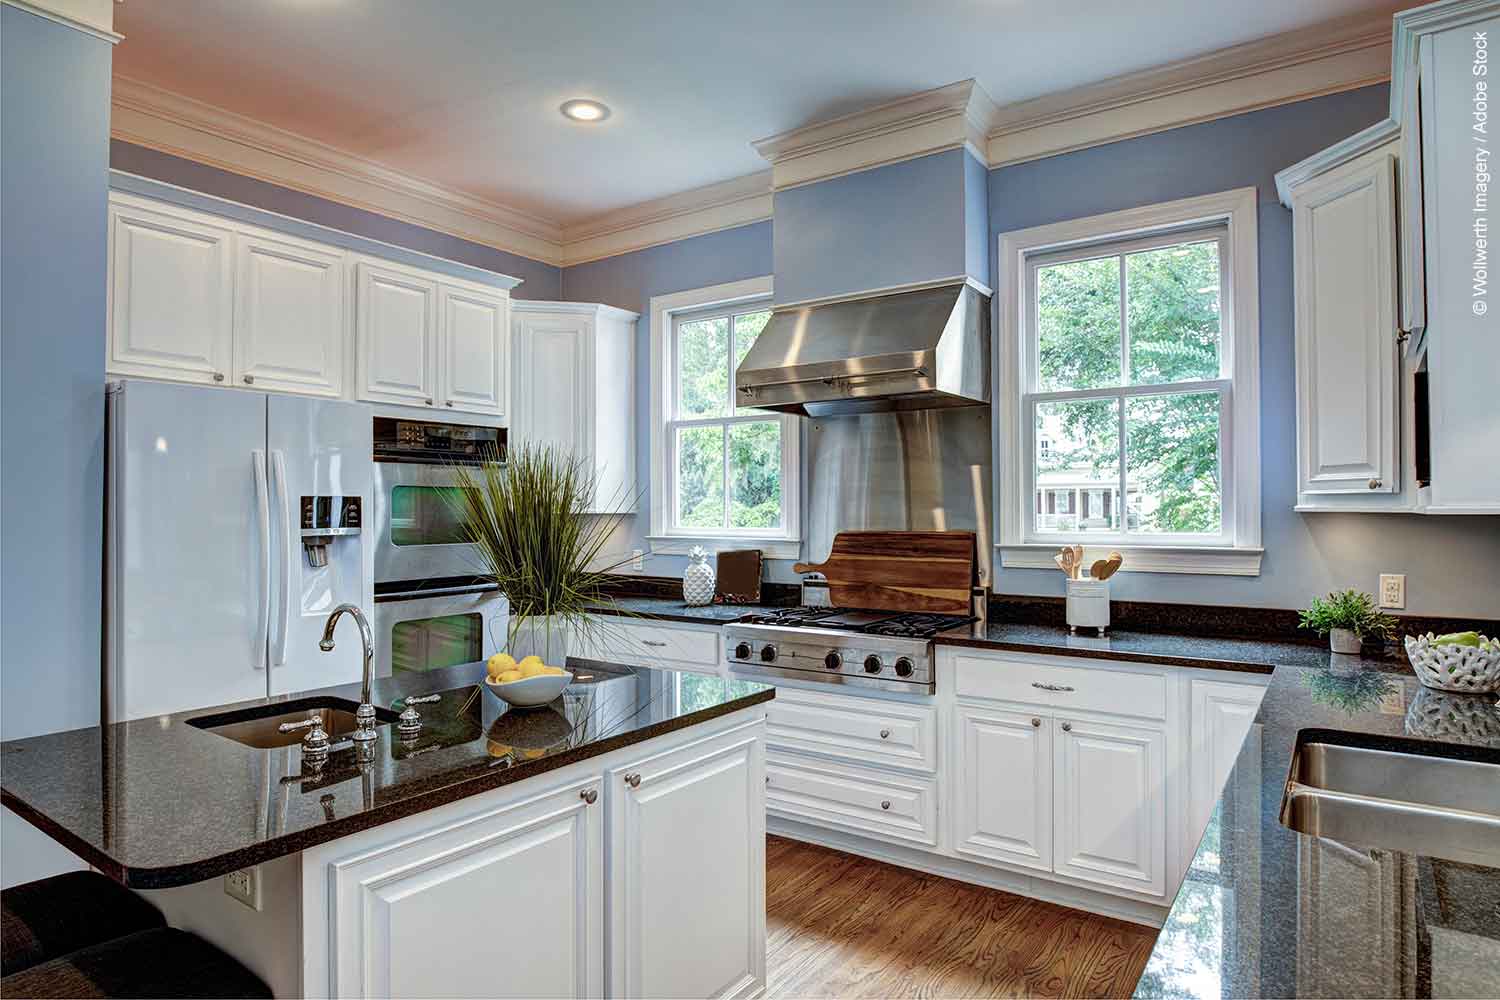 Large kitchen interior with granite countertops and light blue walls